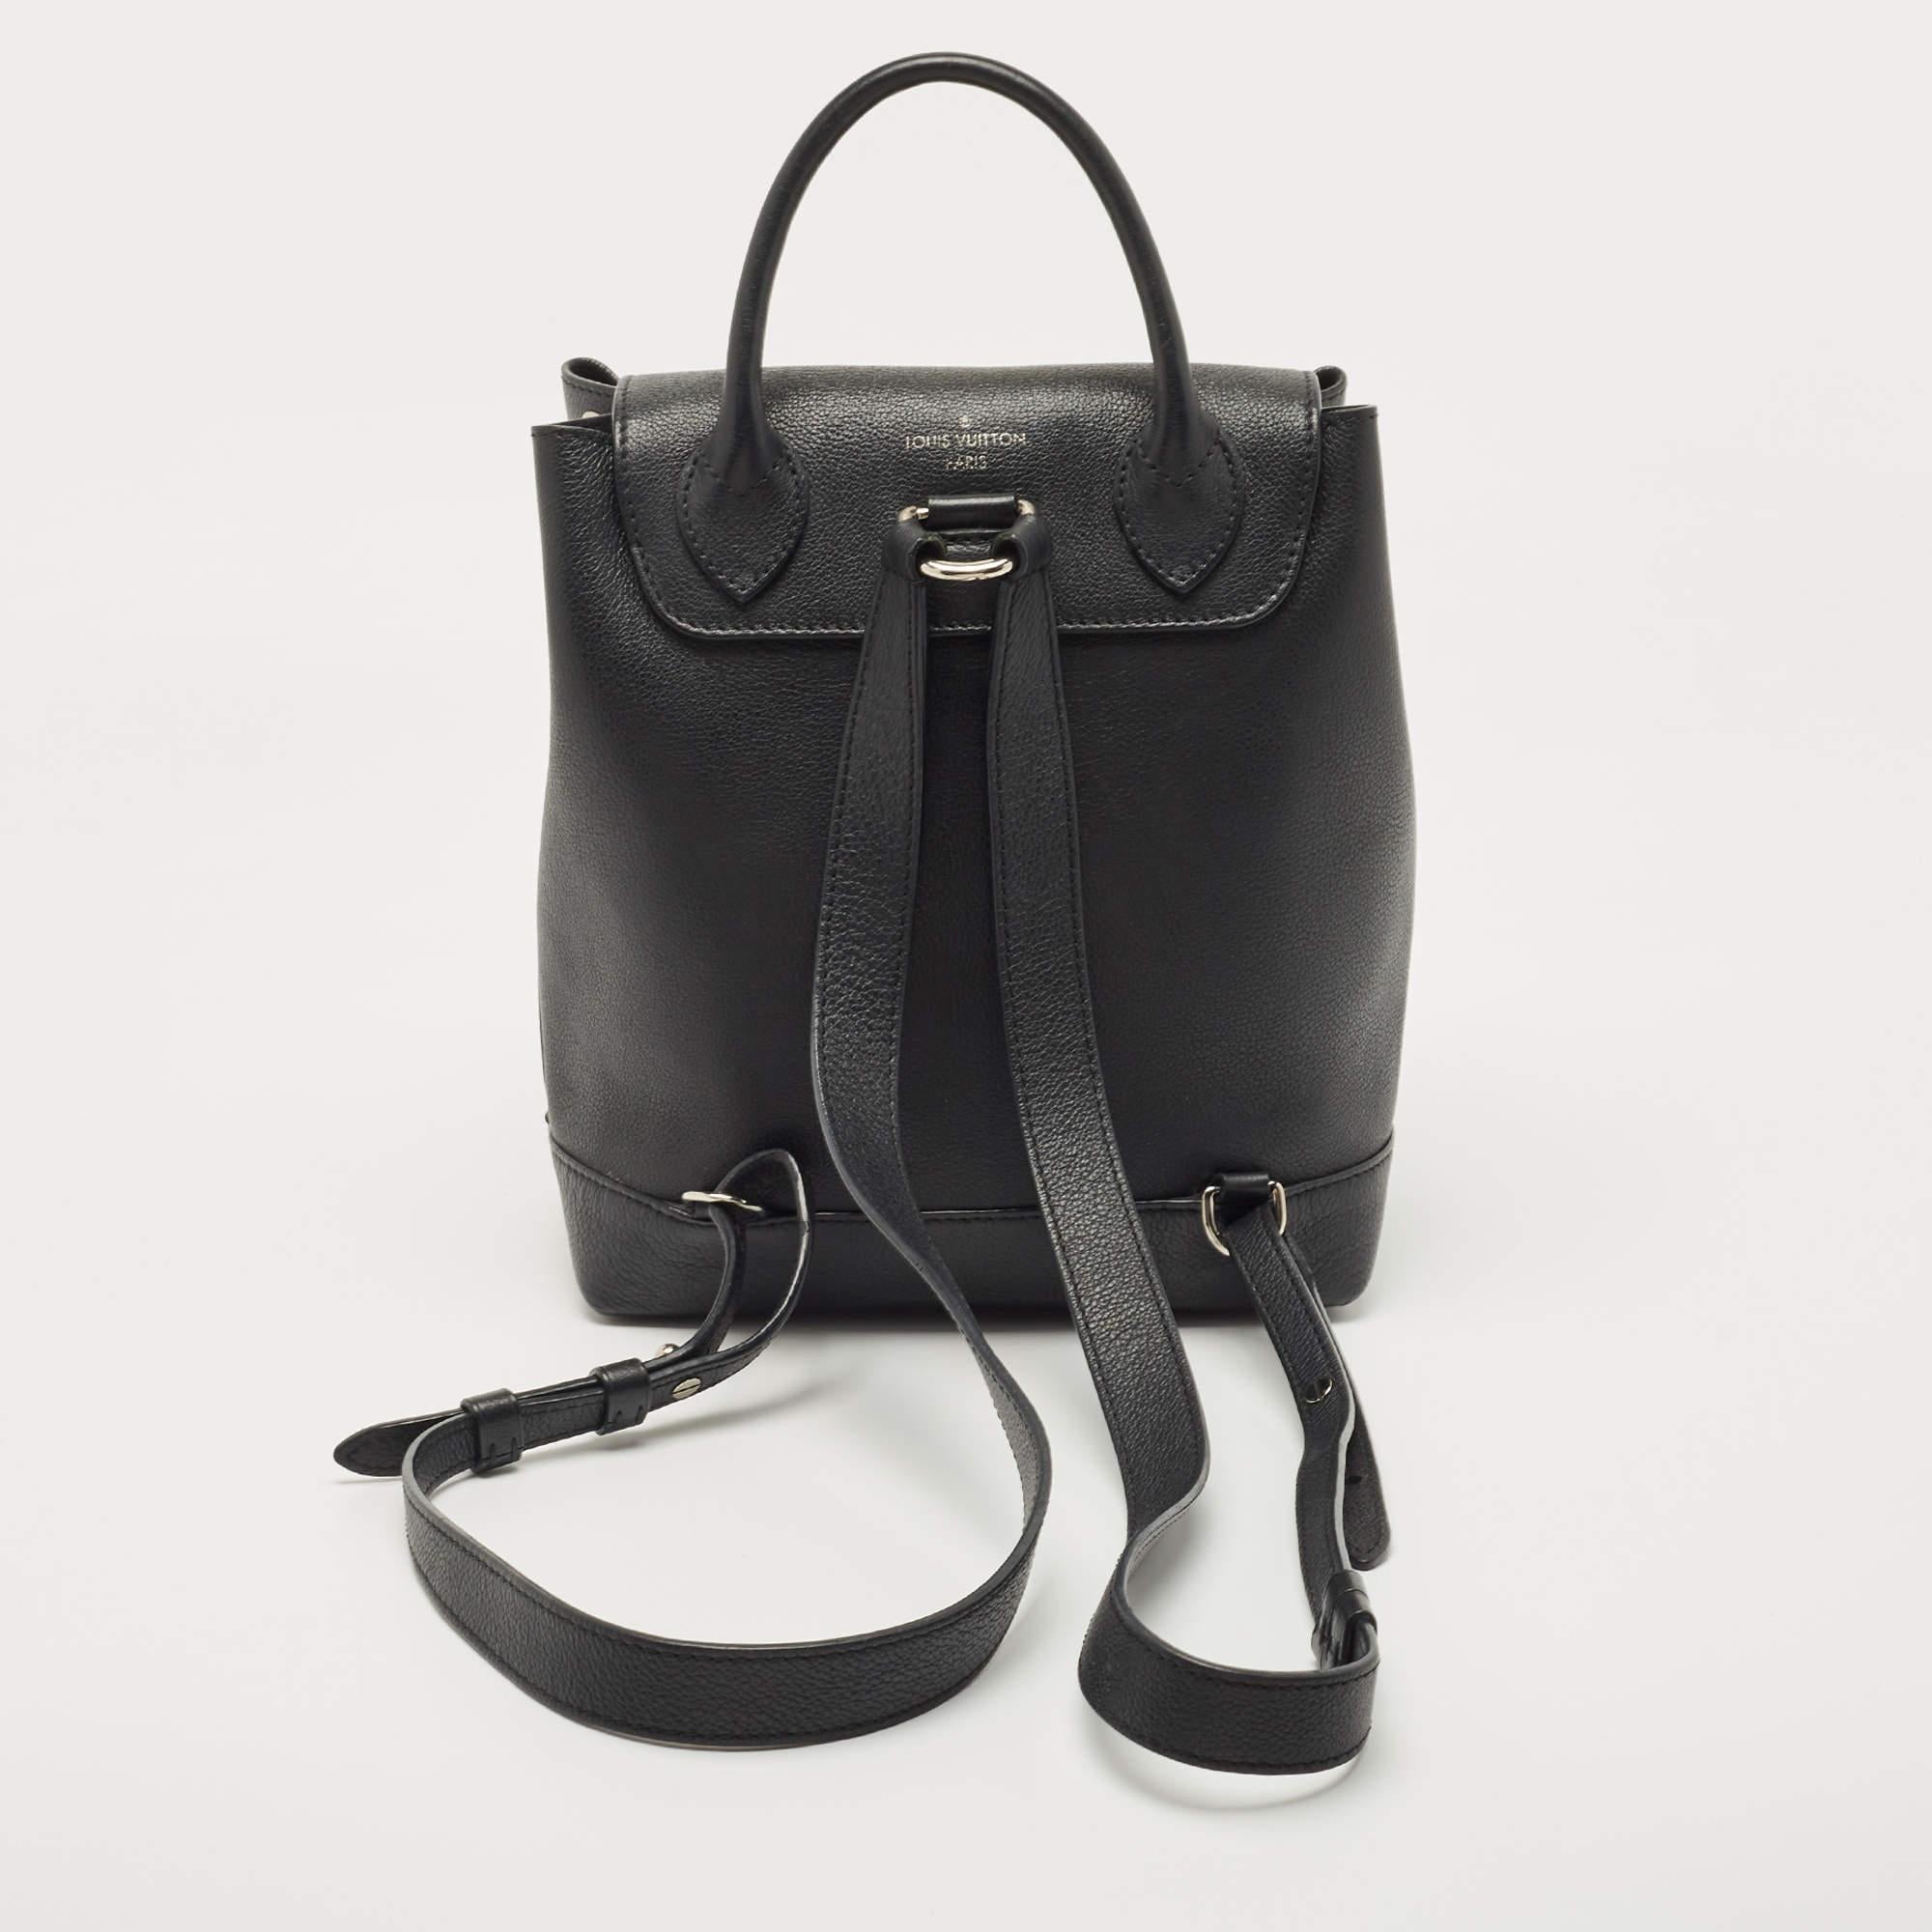 A beautiful bag for everyday use or while traveling is this backpack by Louis Vuitton. It has been sewn using supple leather and detailed with the signature LV twist lock on the flap. The bag has a top handle and shoulder straps.

